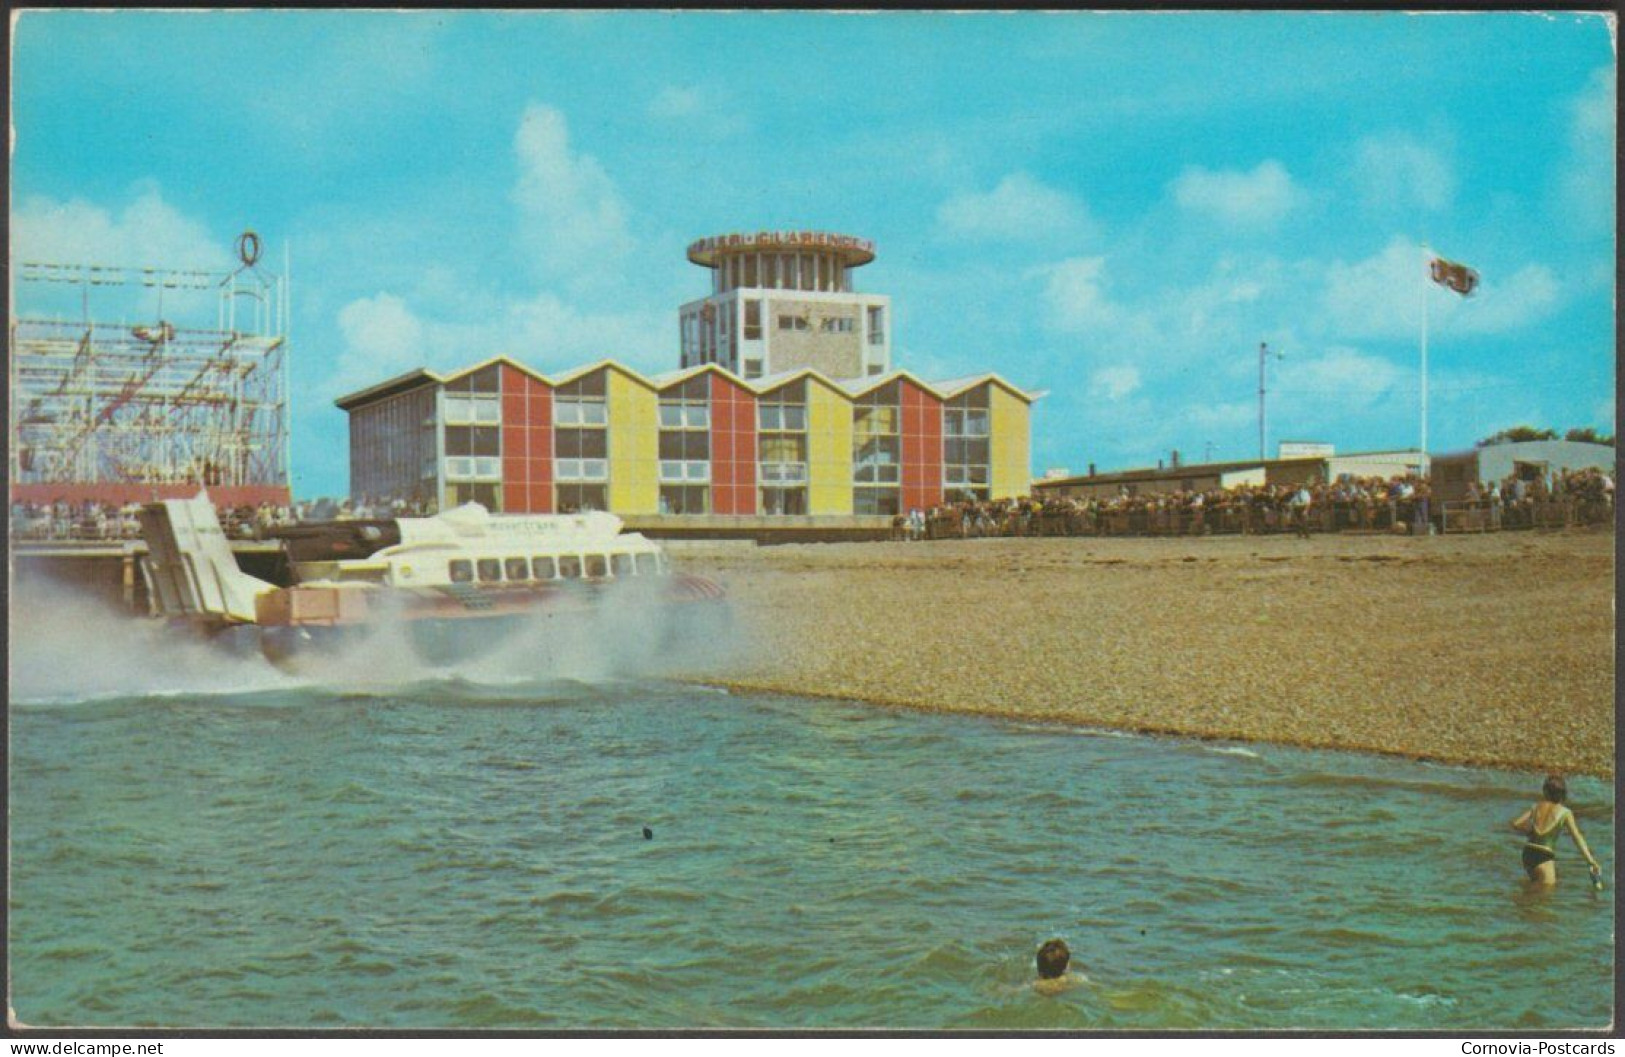 Hovercraft And Clarence Pier, Southsea, Hampshire, C.1960s - Postcard - Southsea